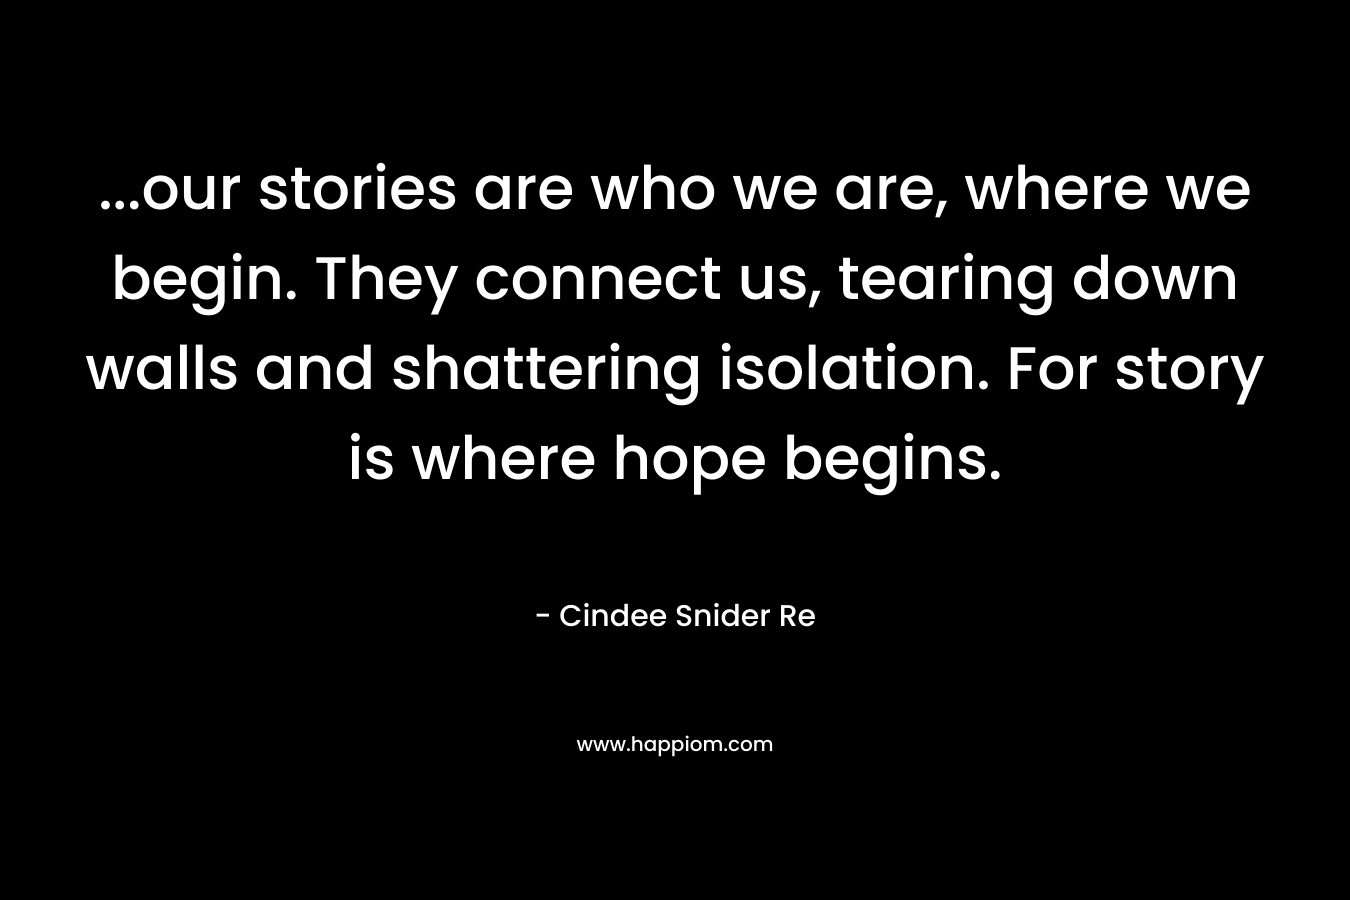 …our stories are who we are, where we begin. They connect us, tearing down walls and shattering isolation. For story is where hope begins. – Cindee Snider Re